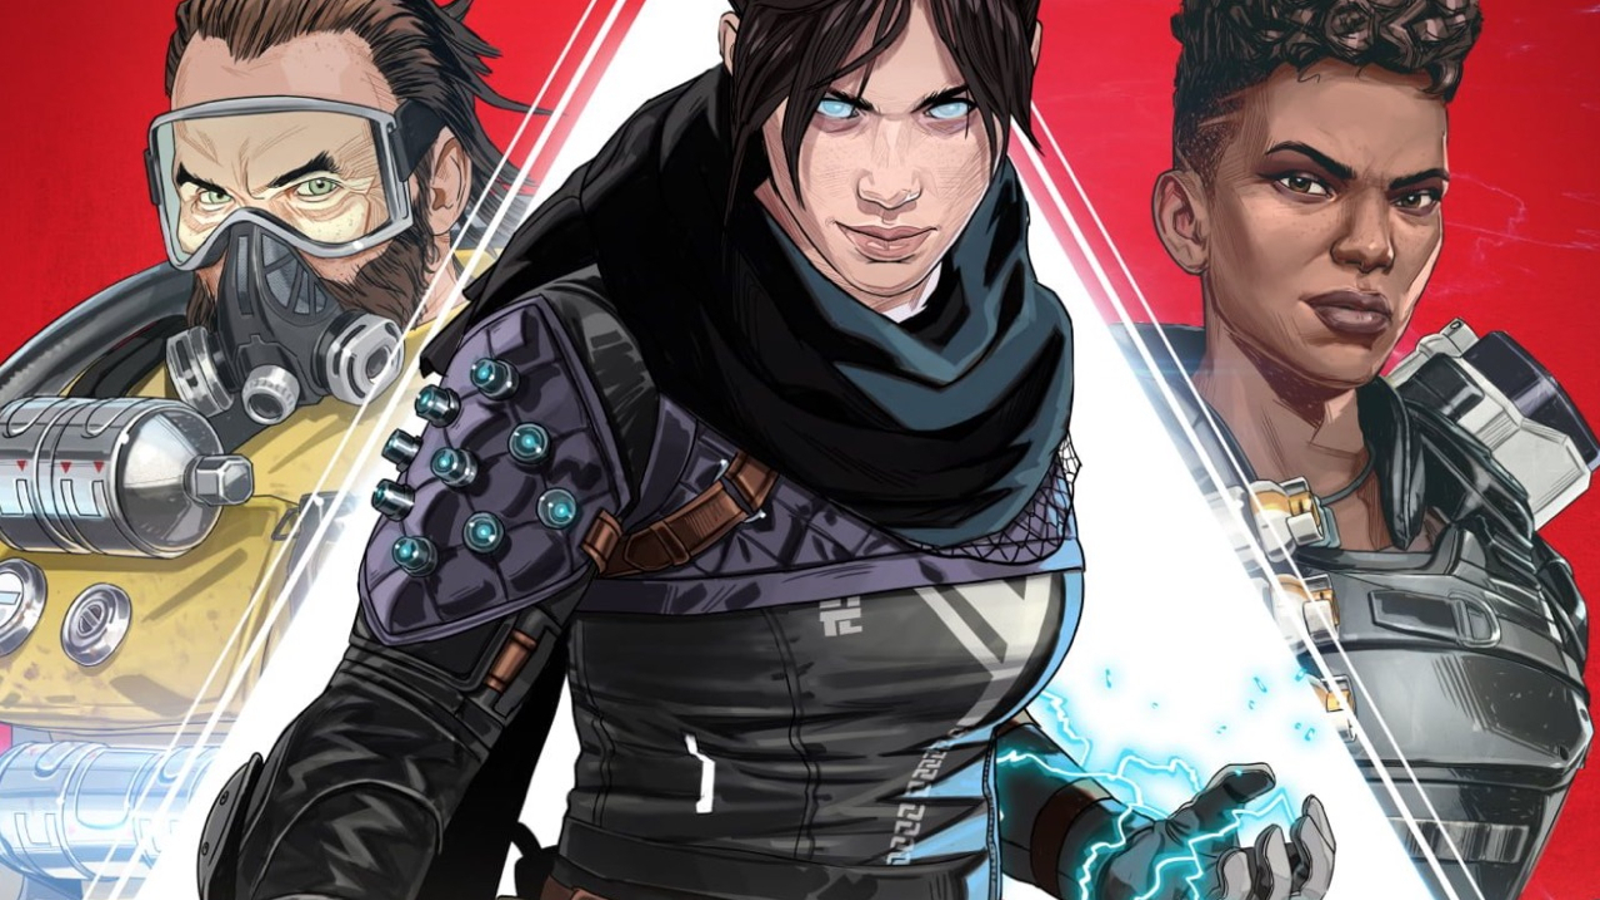 Apex Legends Season 7 Mobile - Download & Play for Android APK & iOS